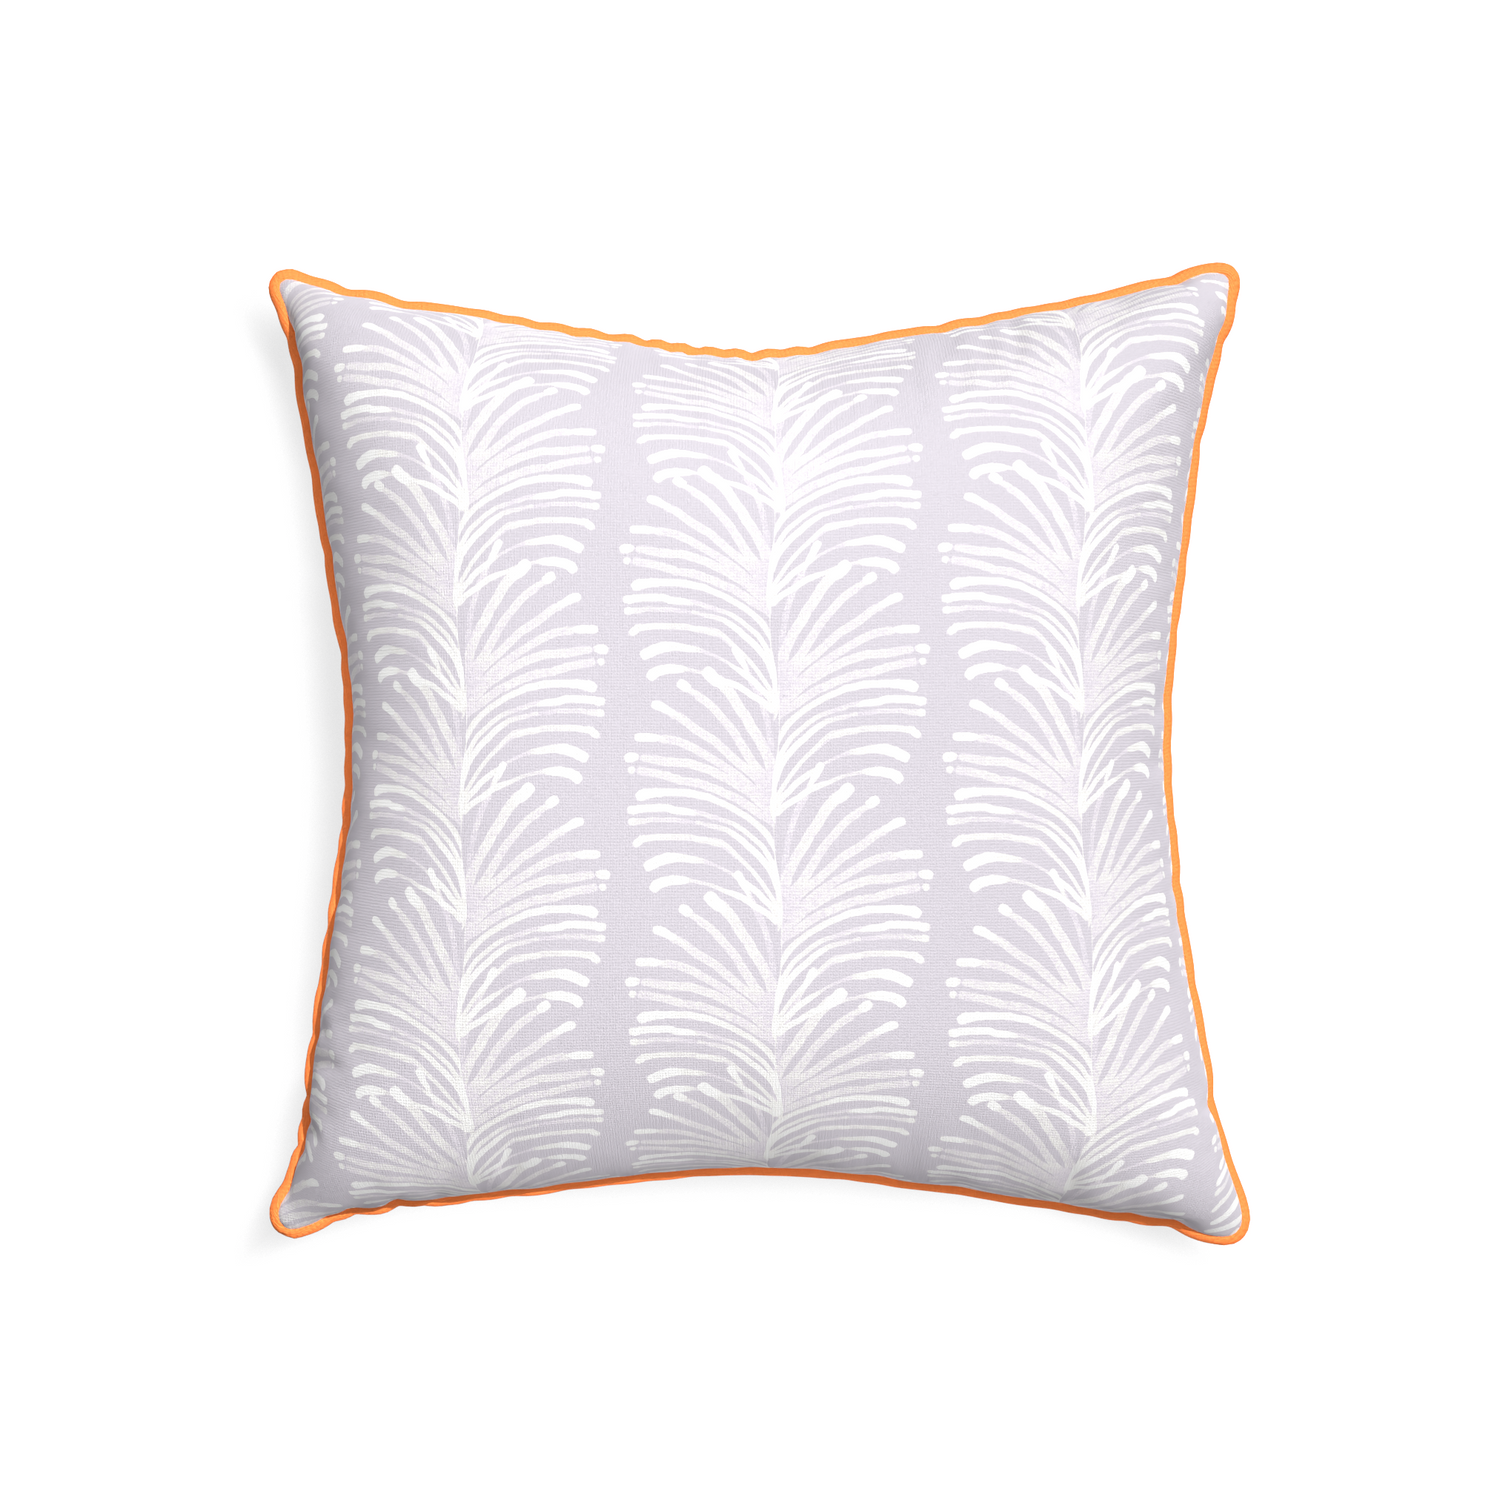 22-square emma lavender custom pillow with clementine piping on white background